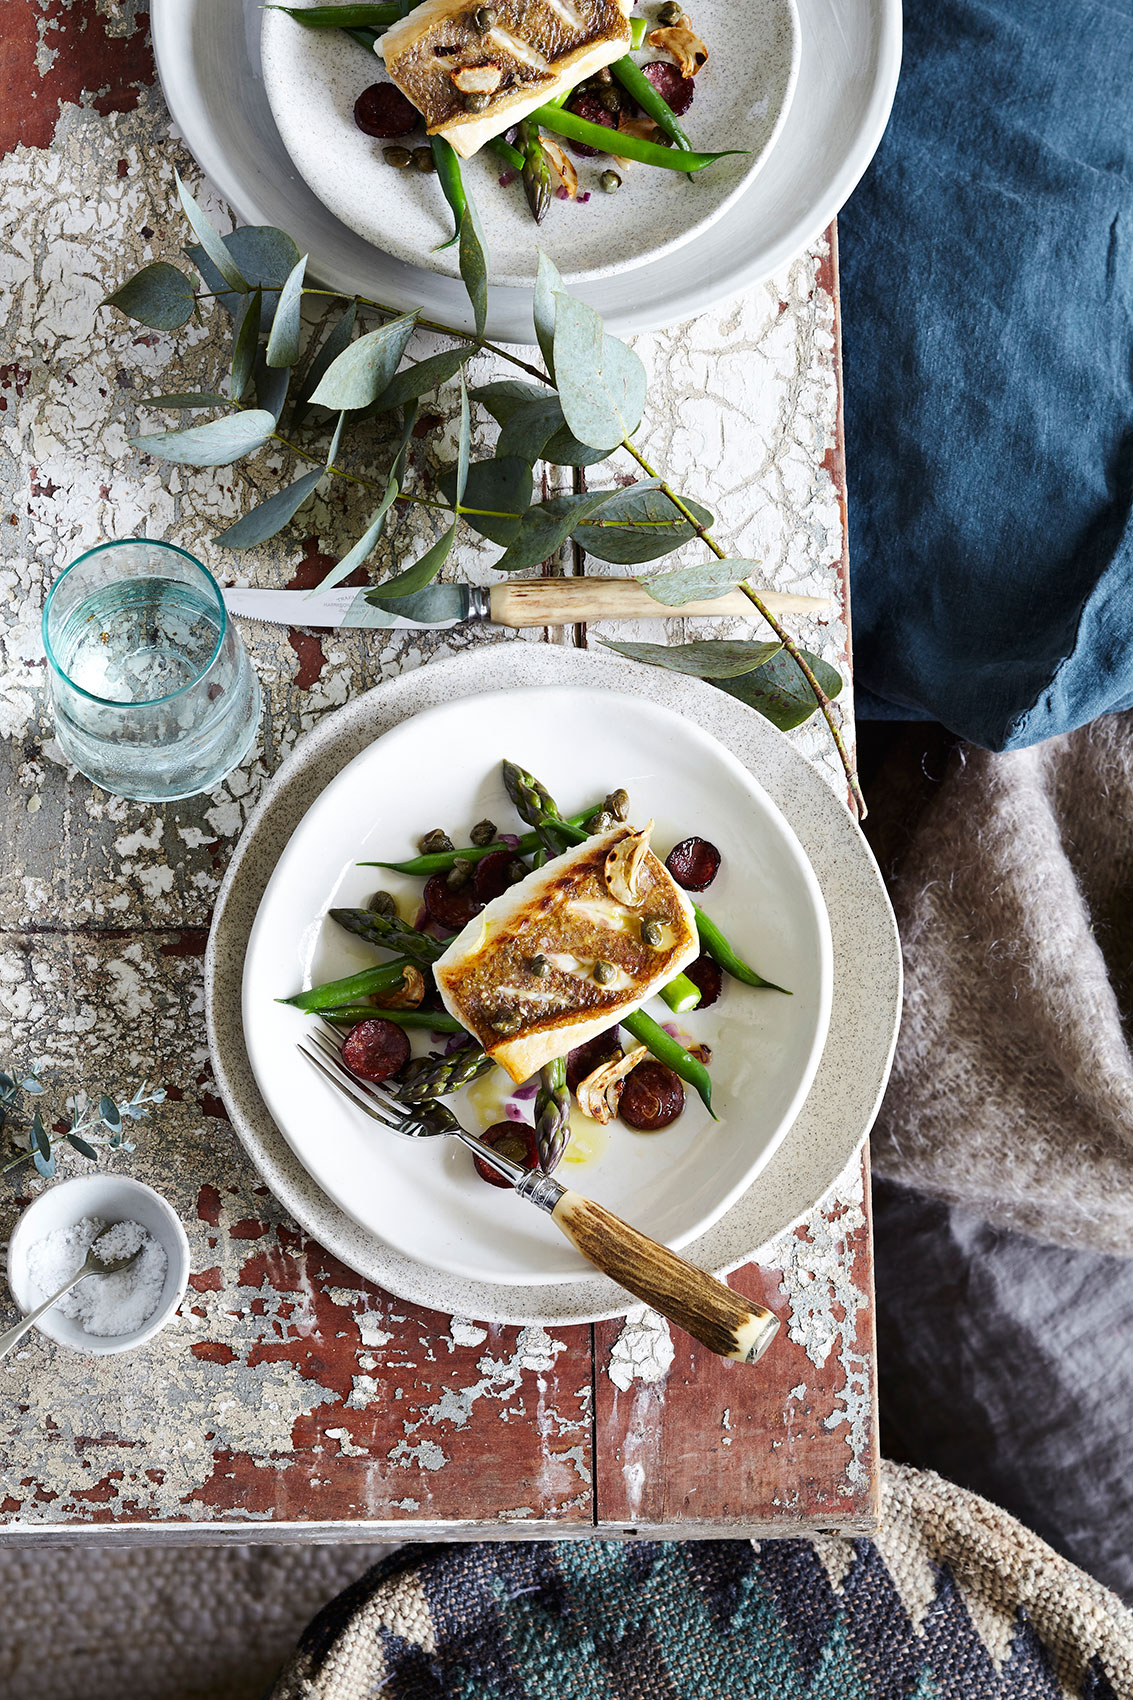 Winter Menu Snapper with Capers & Asparagus • Advertising & Editorial Food Photography